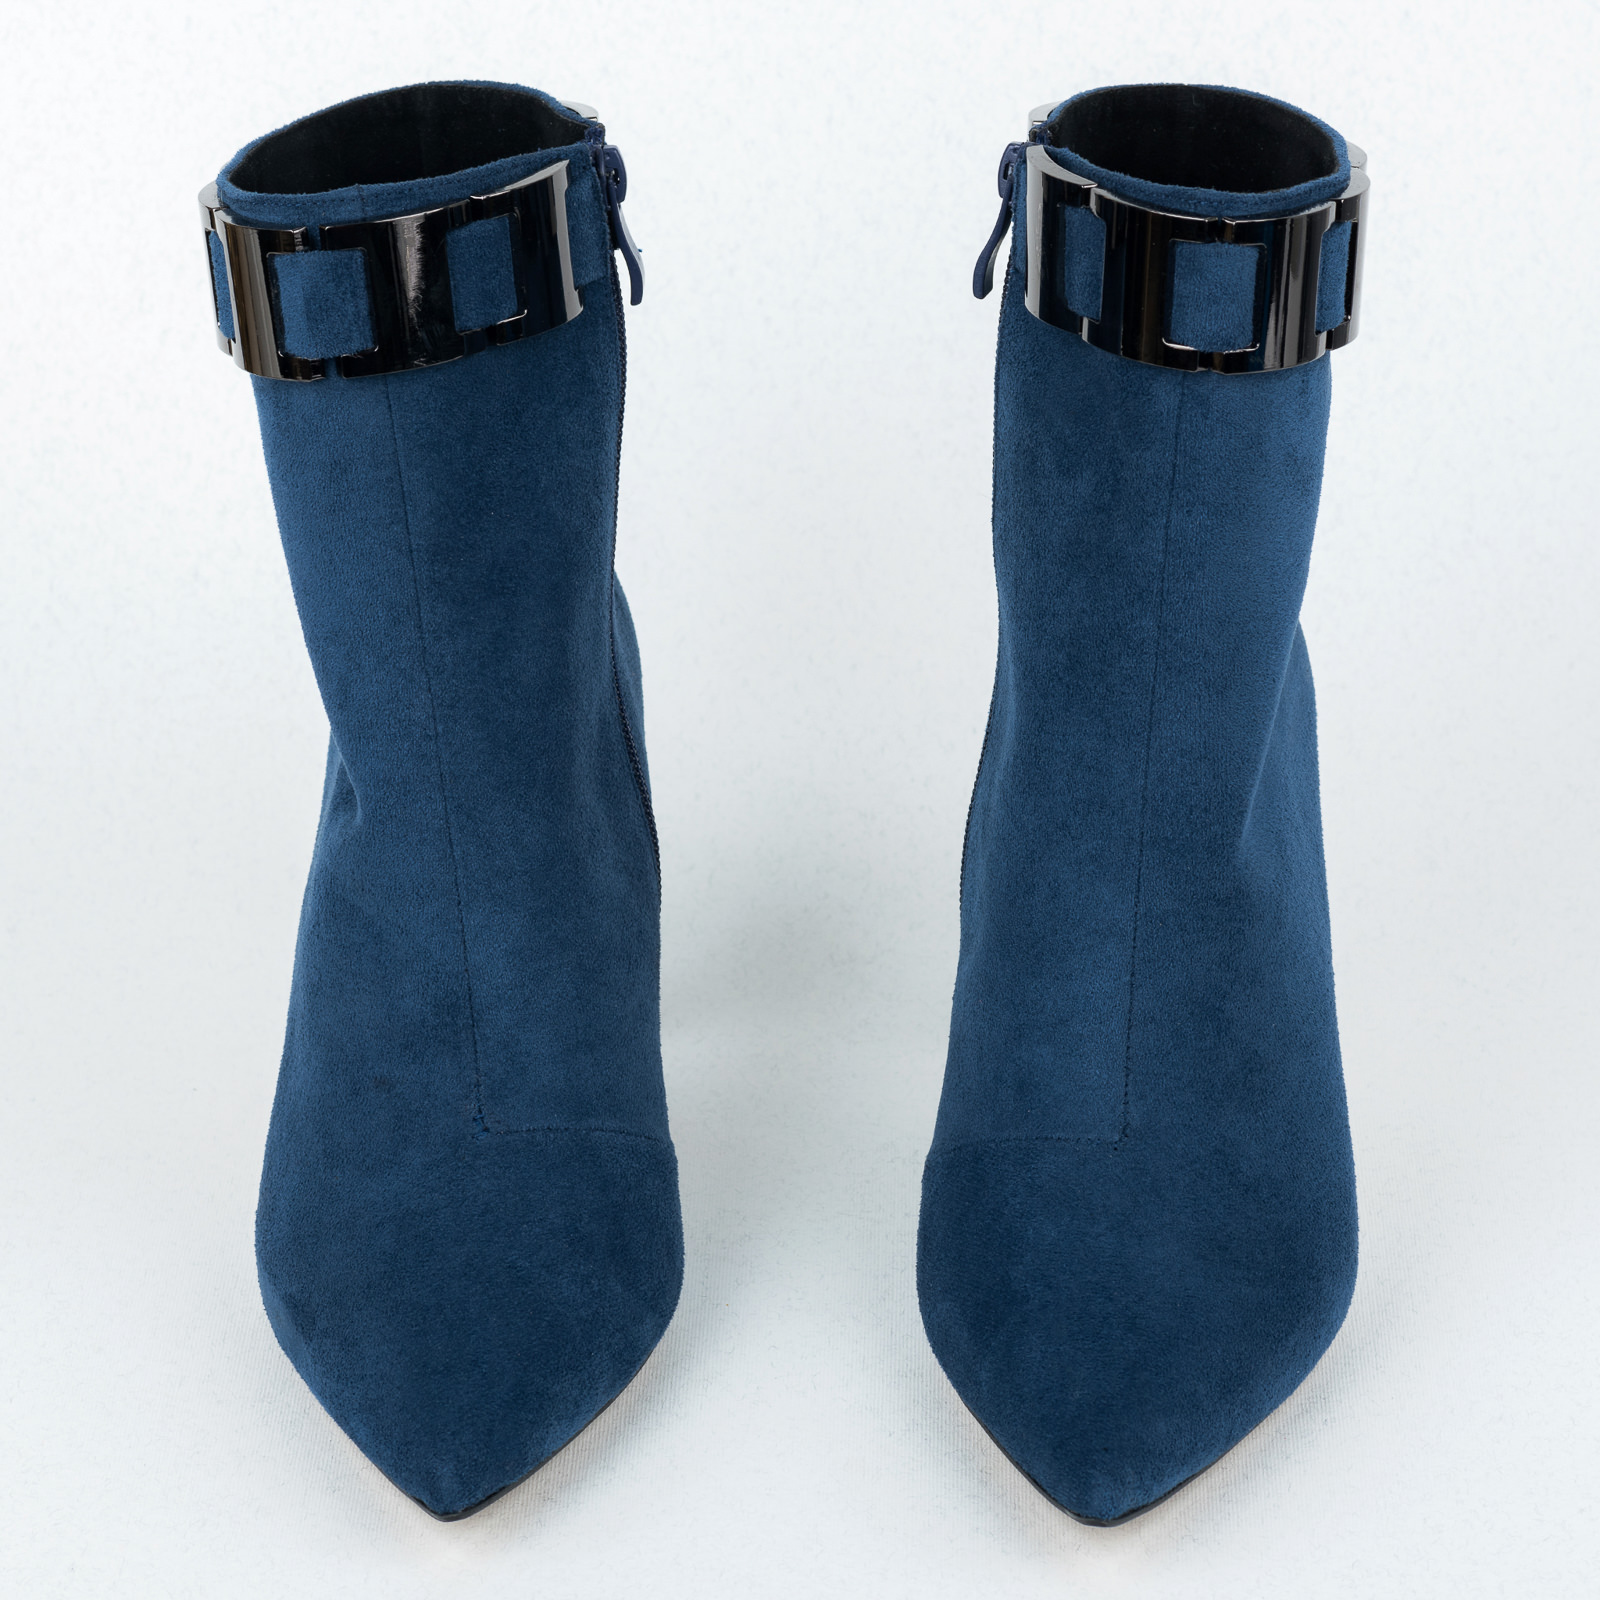 Women ankle boots B607 - NAVY